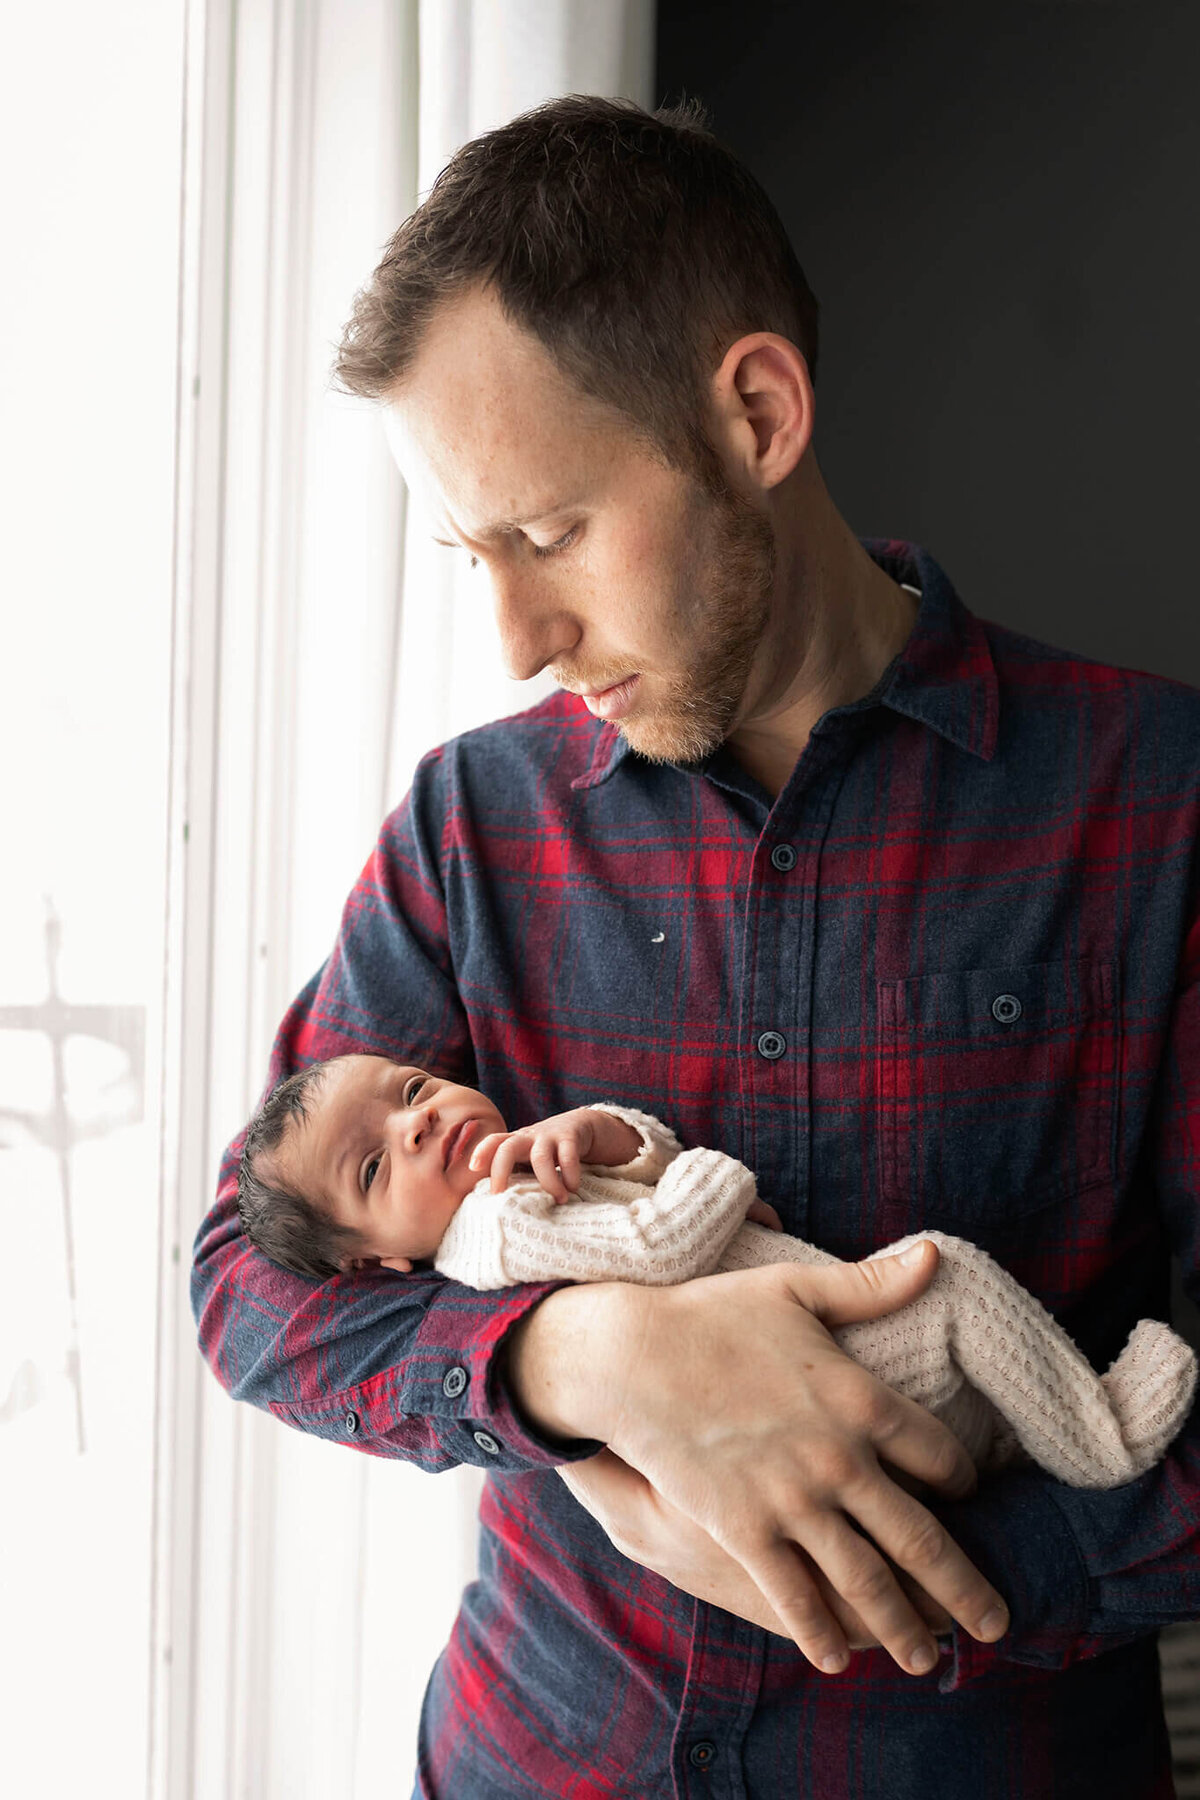 NJ baby photographer captures dad holding his baby